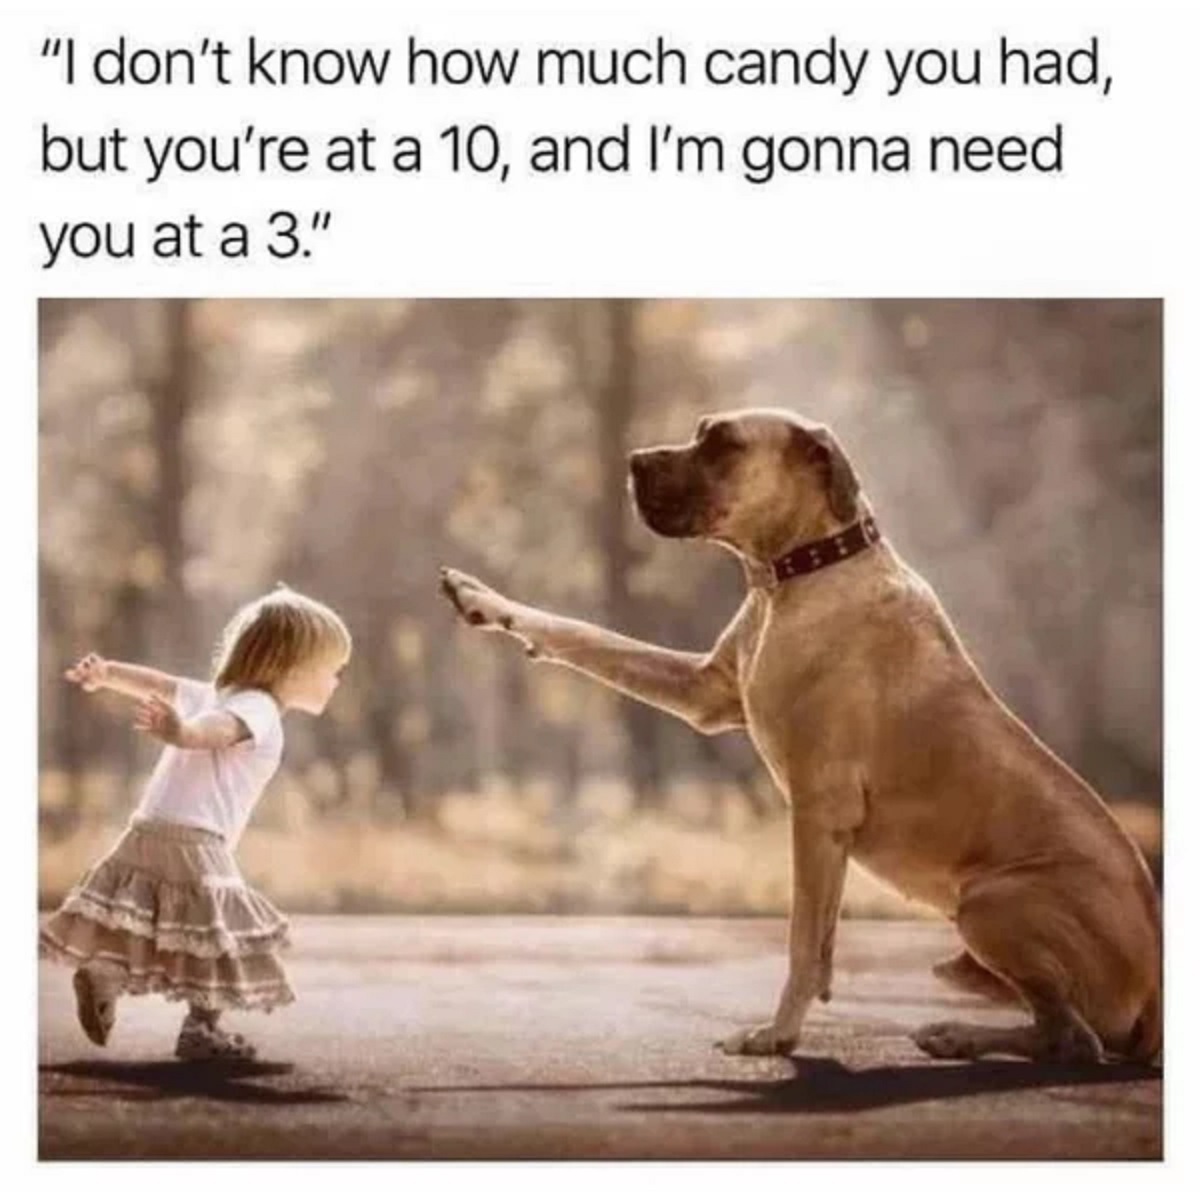 dogs and kids - "I don't know how much candy you had, but you're at a 10, and I'm gonna need you at a 3."